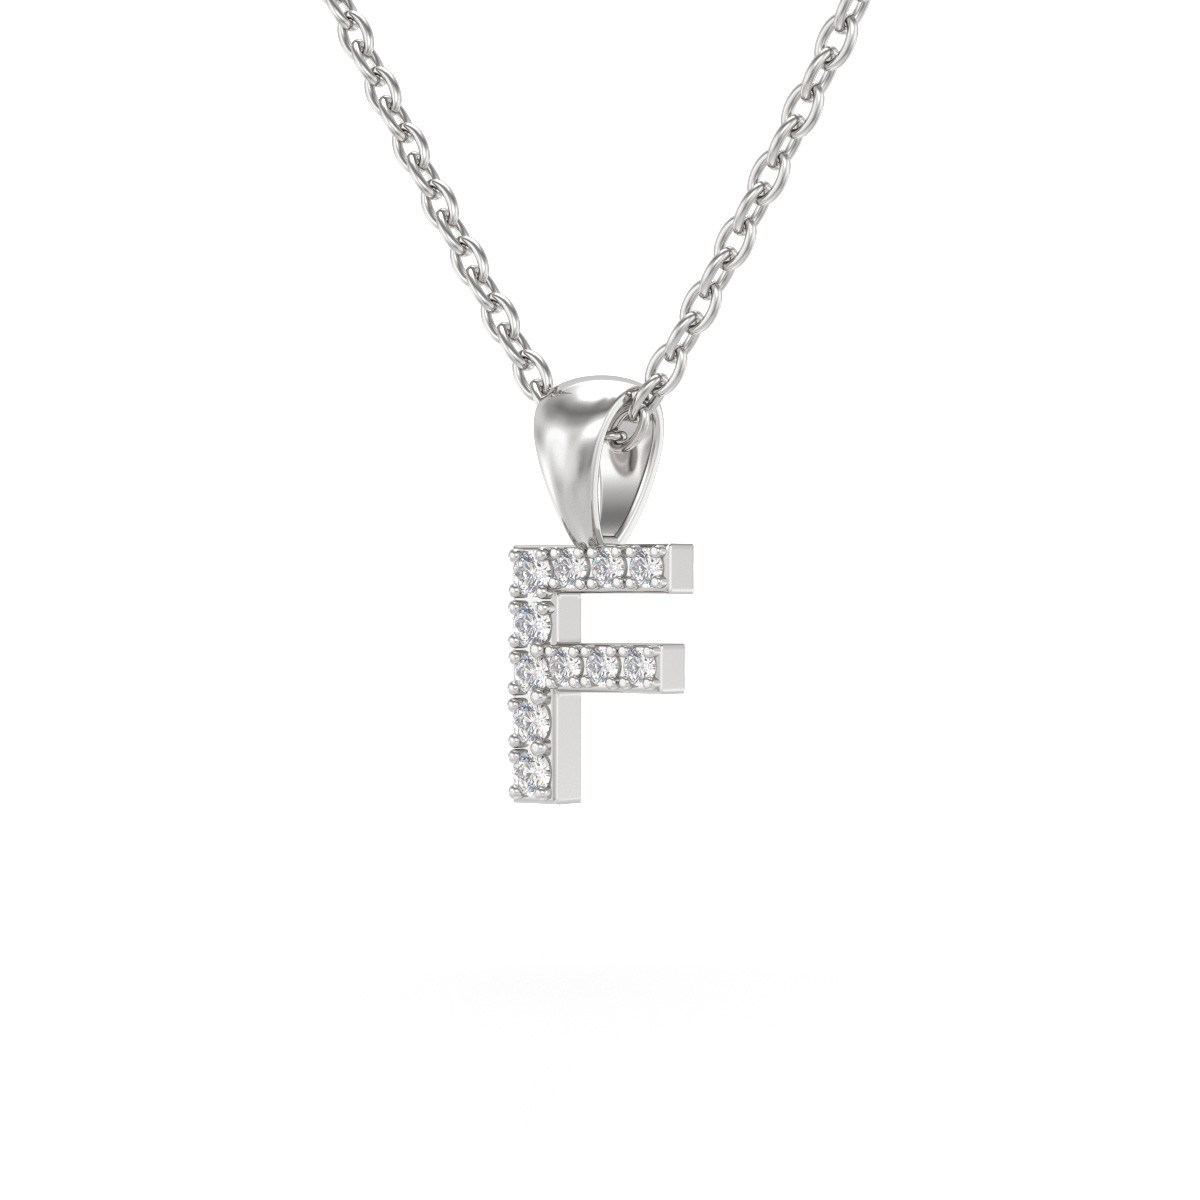 Collier Pendentif ADEN Lettre F Or 750 Blanc Diamant Chaine Or 750 incluse 0.72grs - vue 3